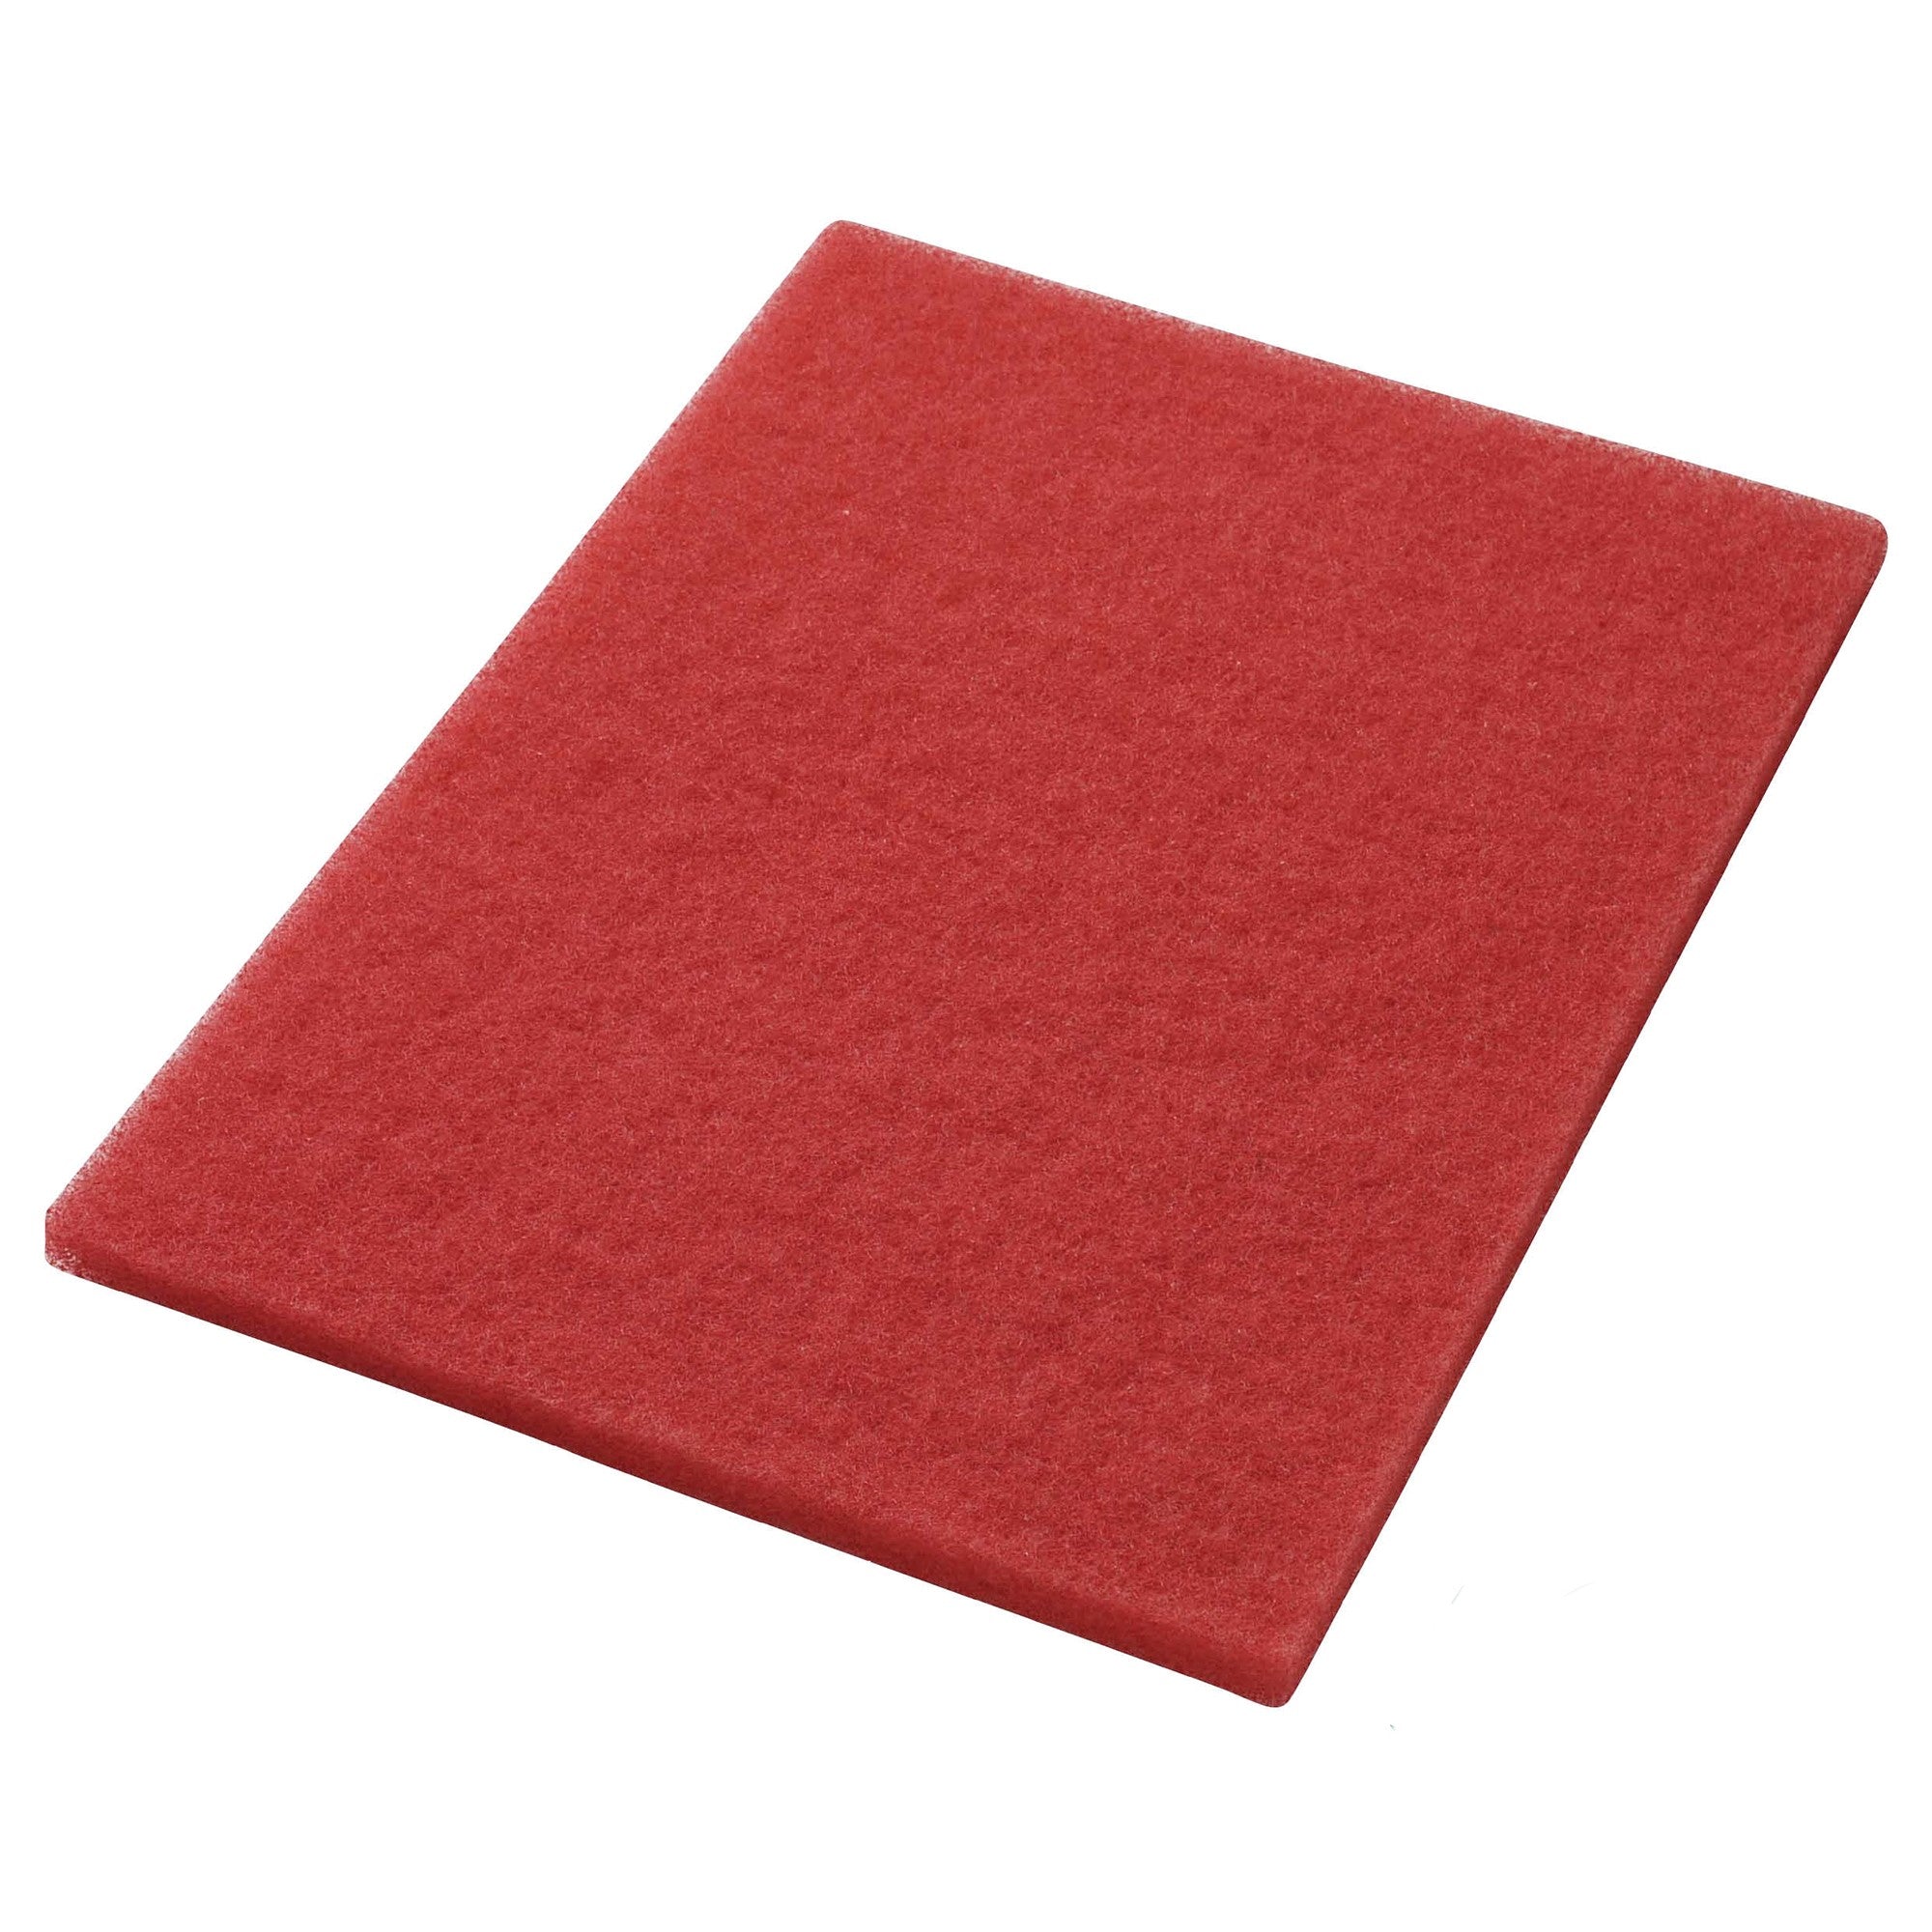 Pad rouge, 350x500 mm, polyester